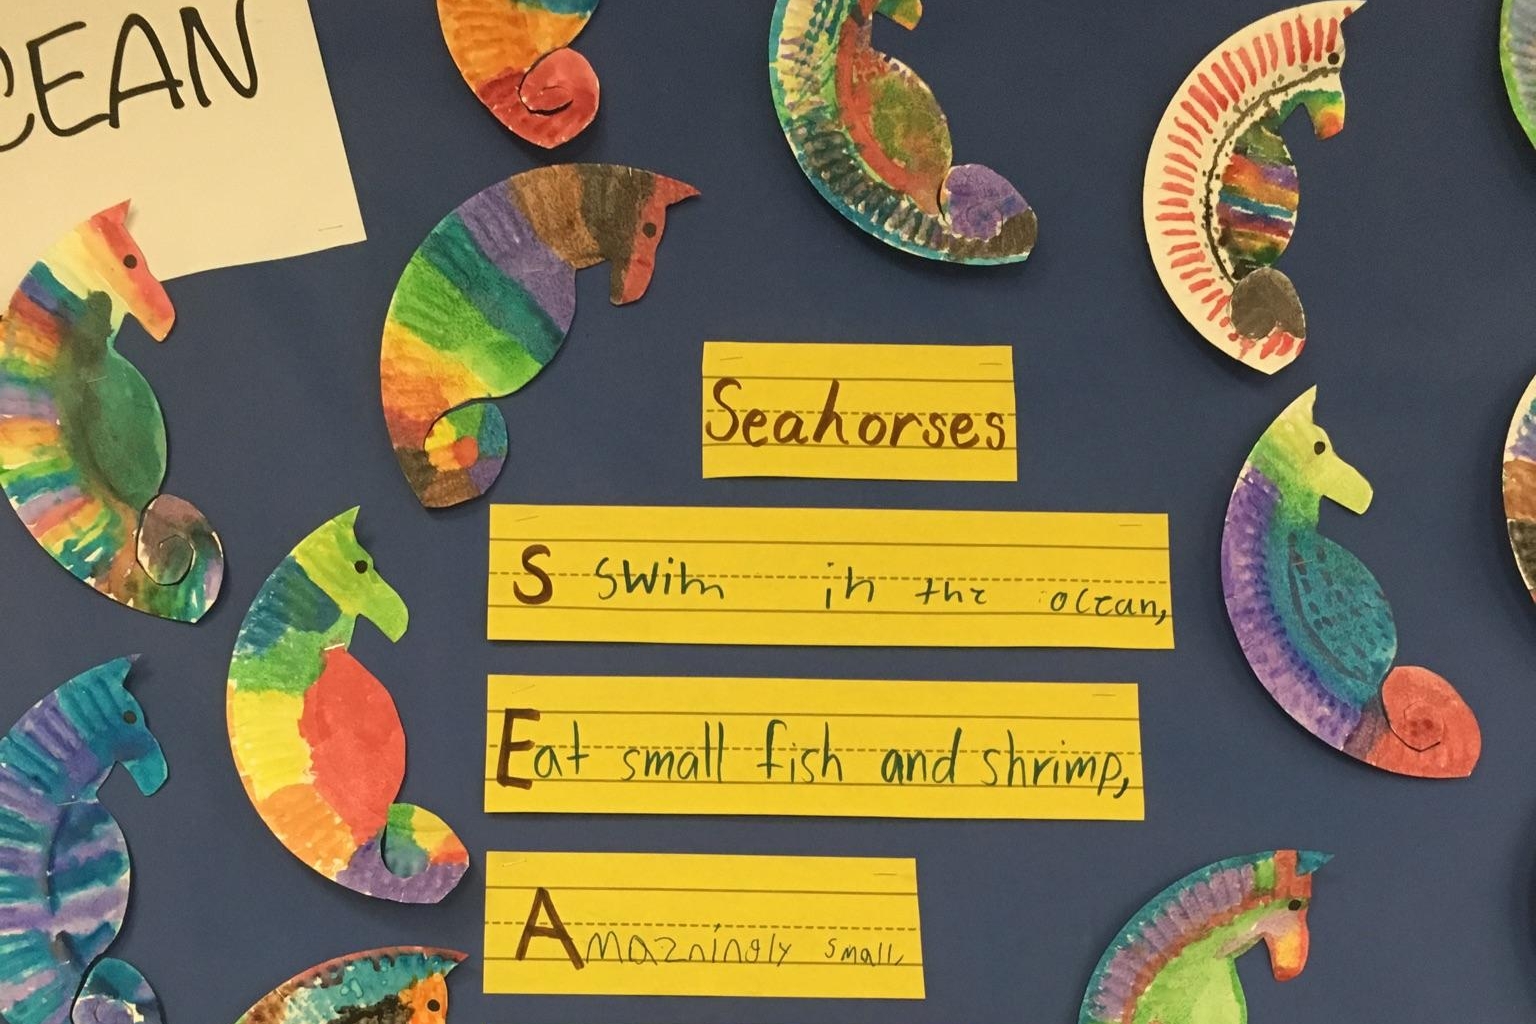 Mrs. Sanchez's Explorers dove into learning about Seahorses this week! They produced some amazing writing to reflect their learning!